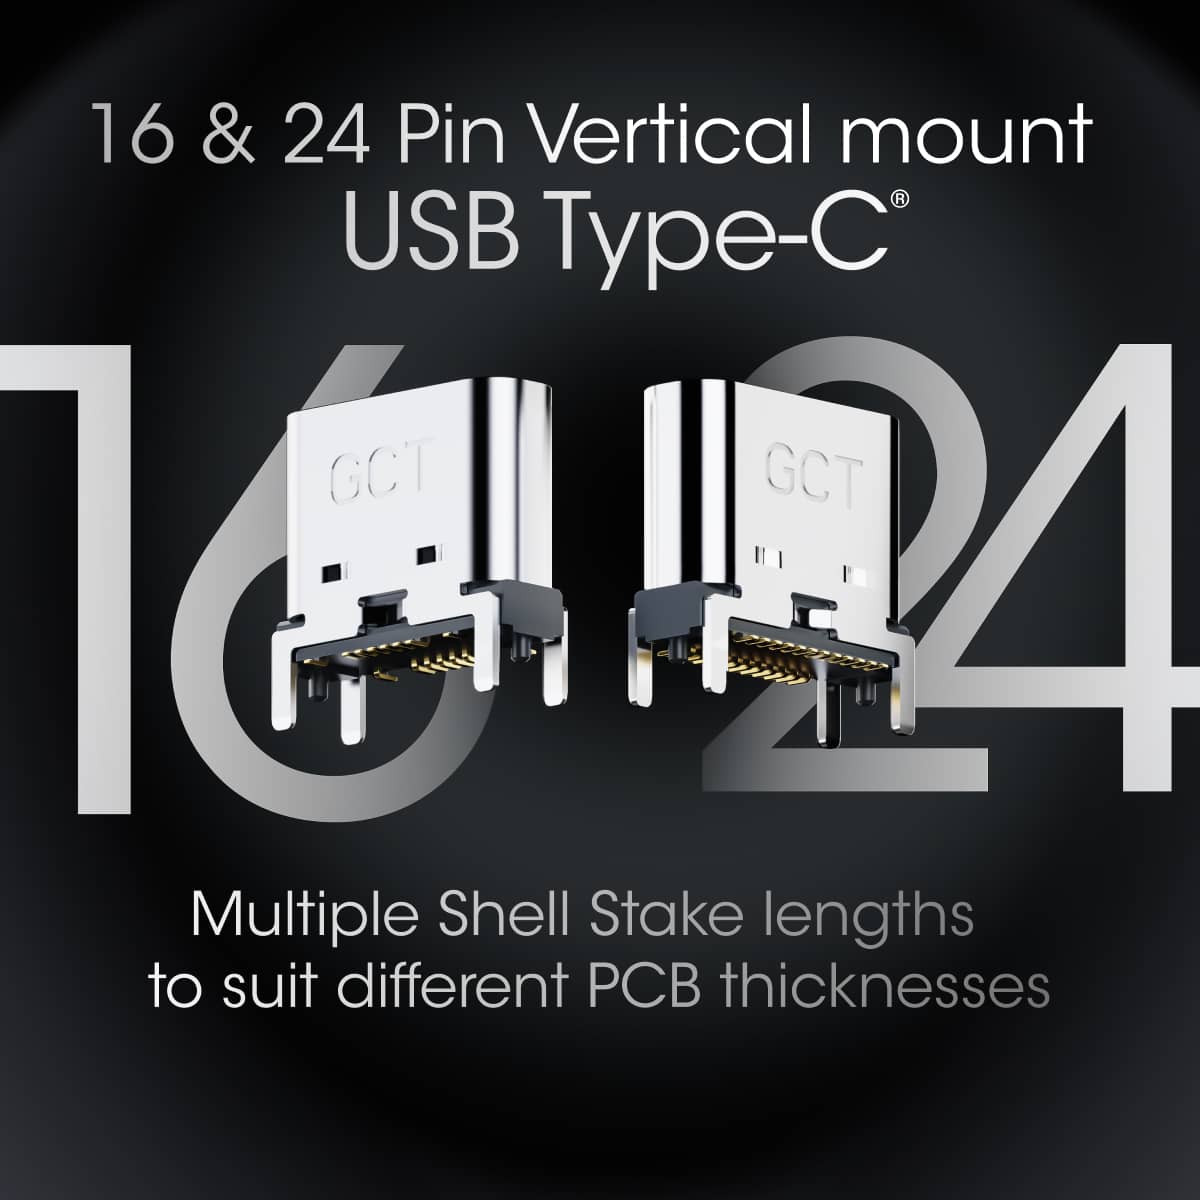 USB Type-C vertical mount16-pin and 24-pin